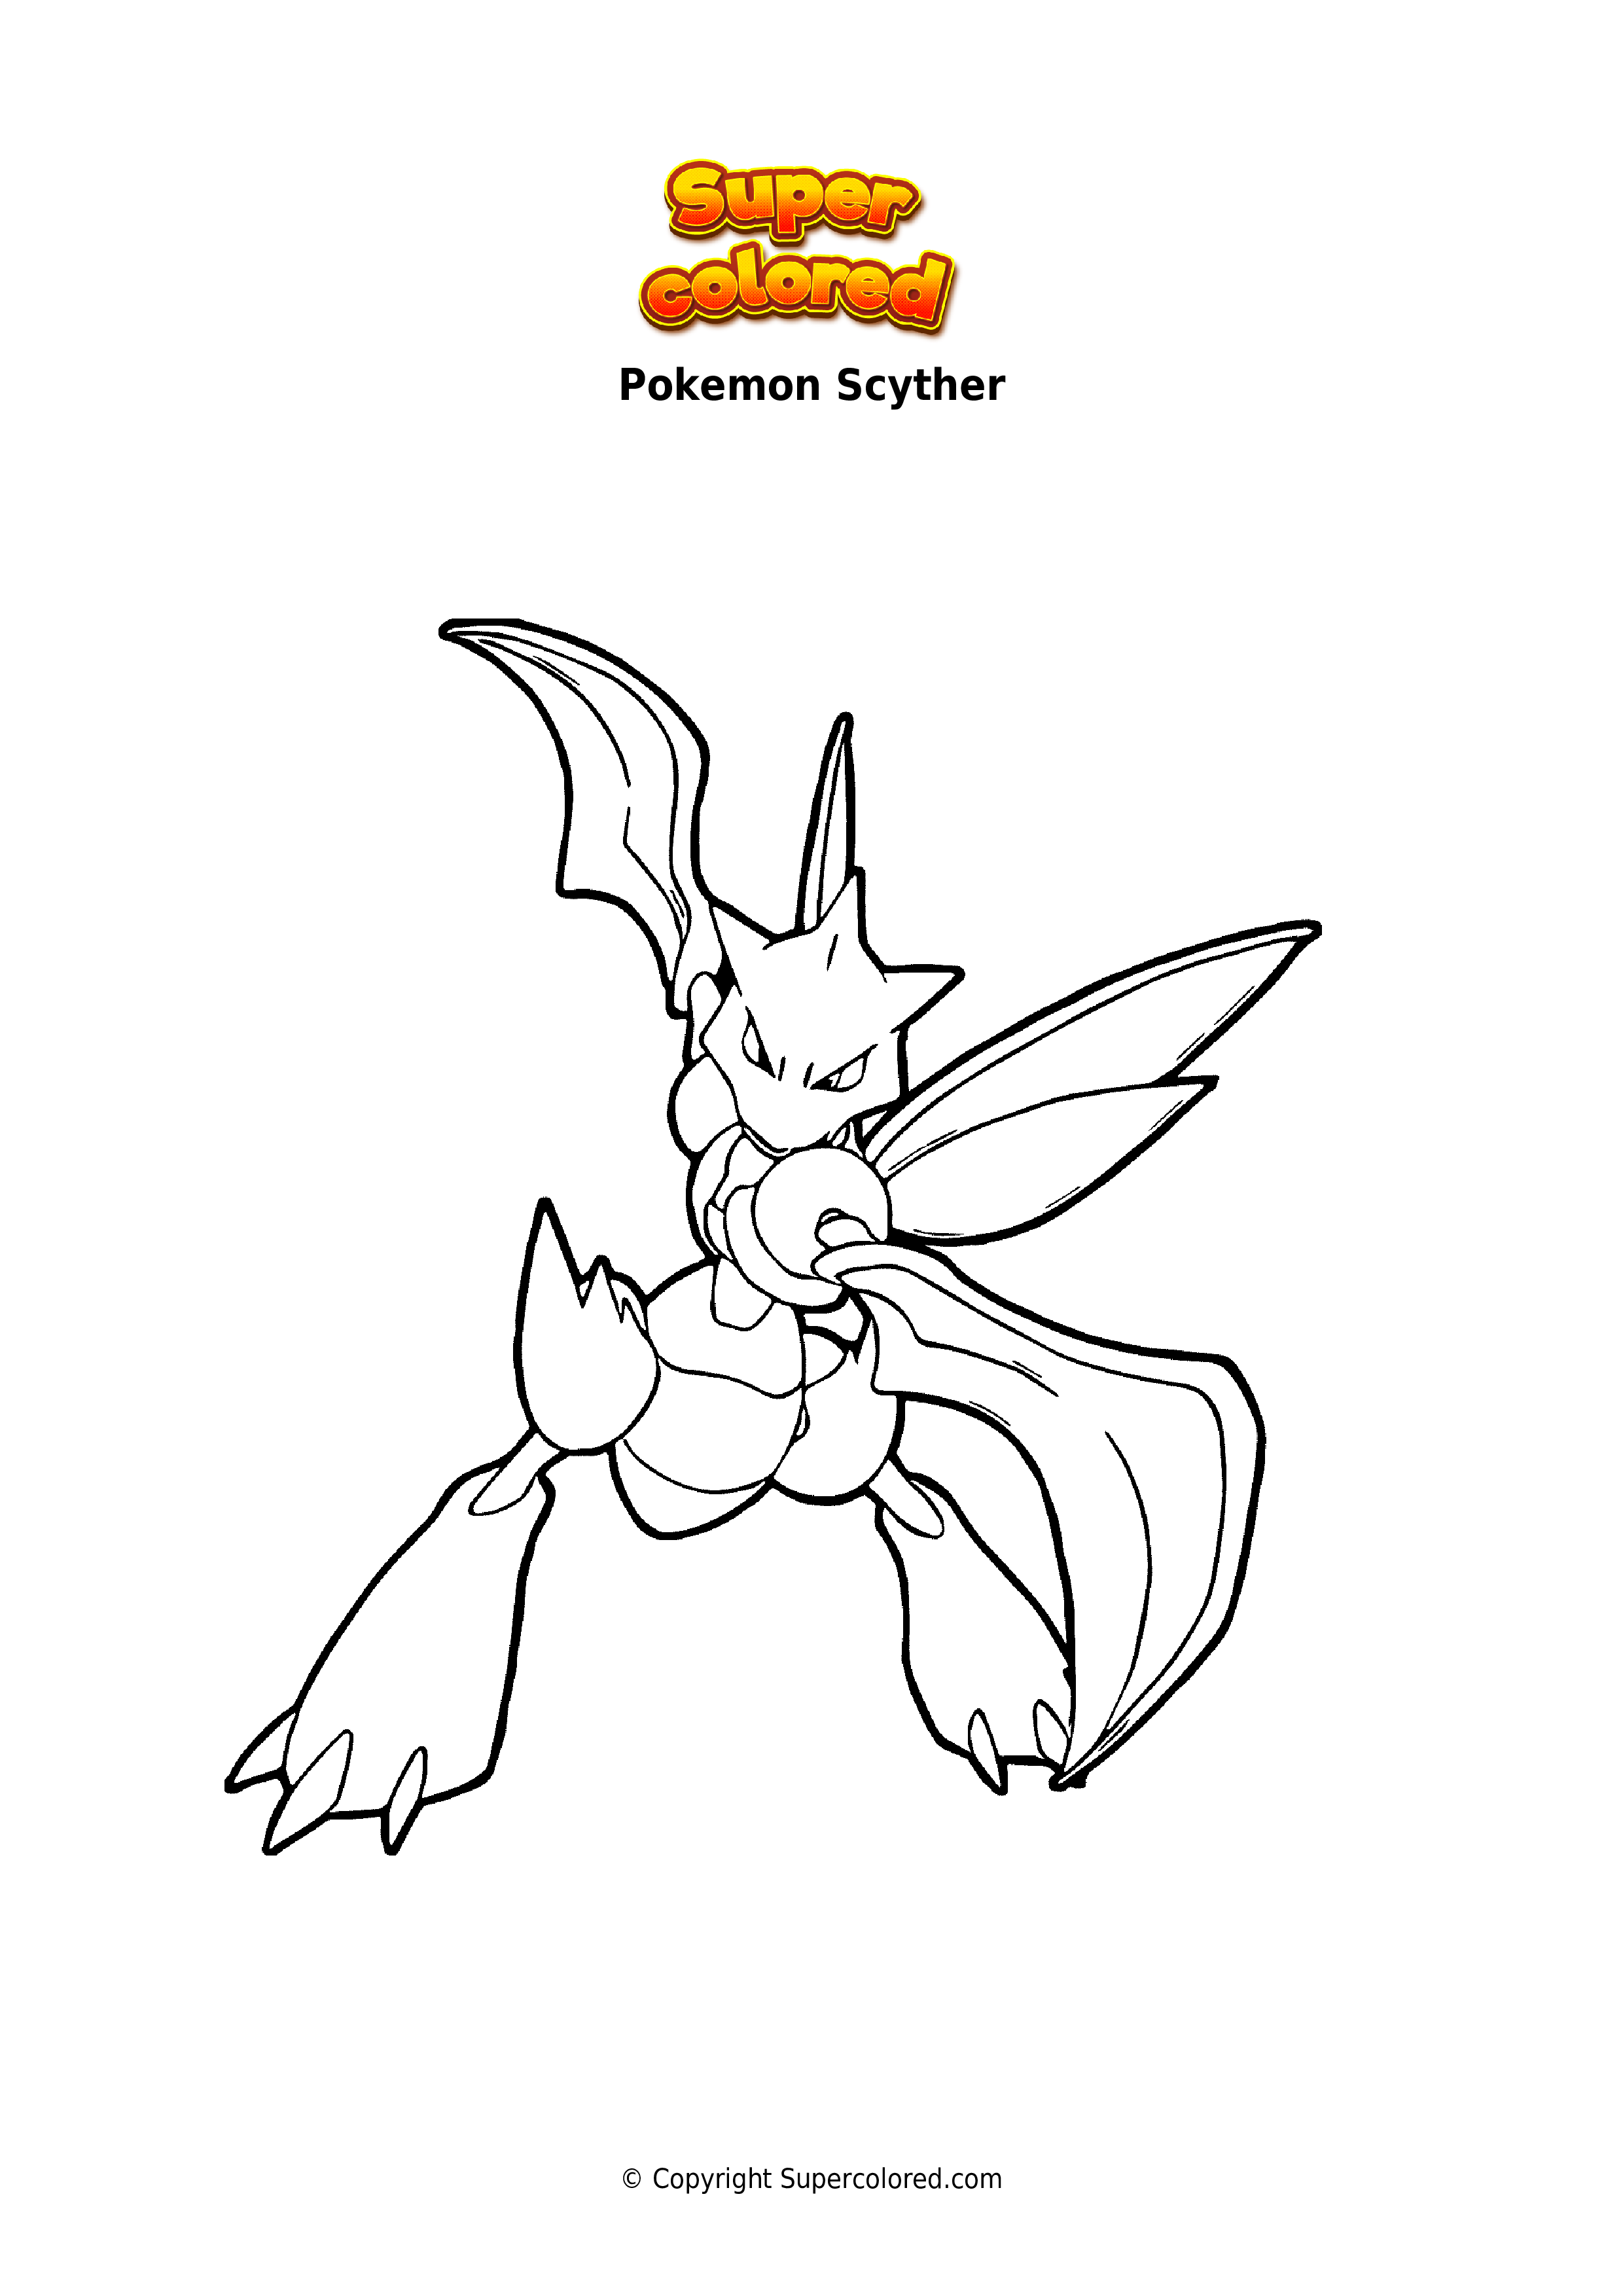 Coloring page Pokemon Scyther - Supercolored.com